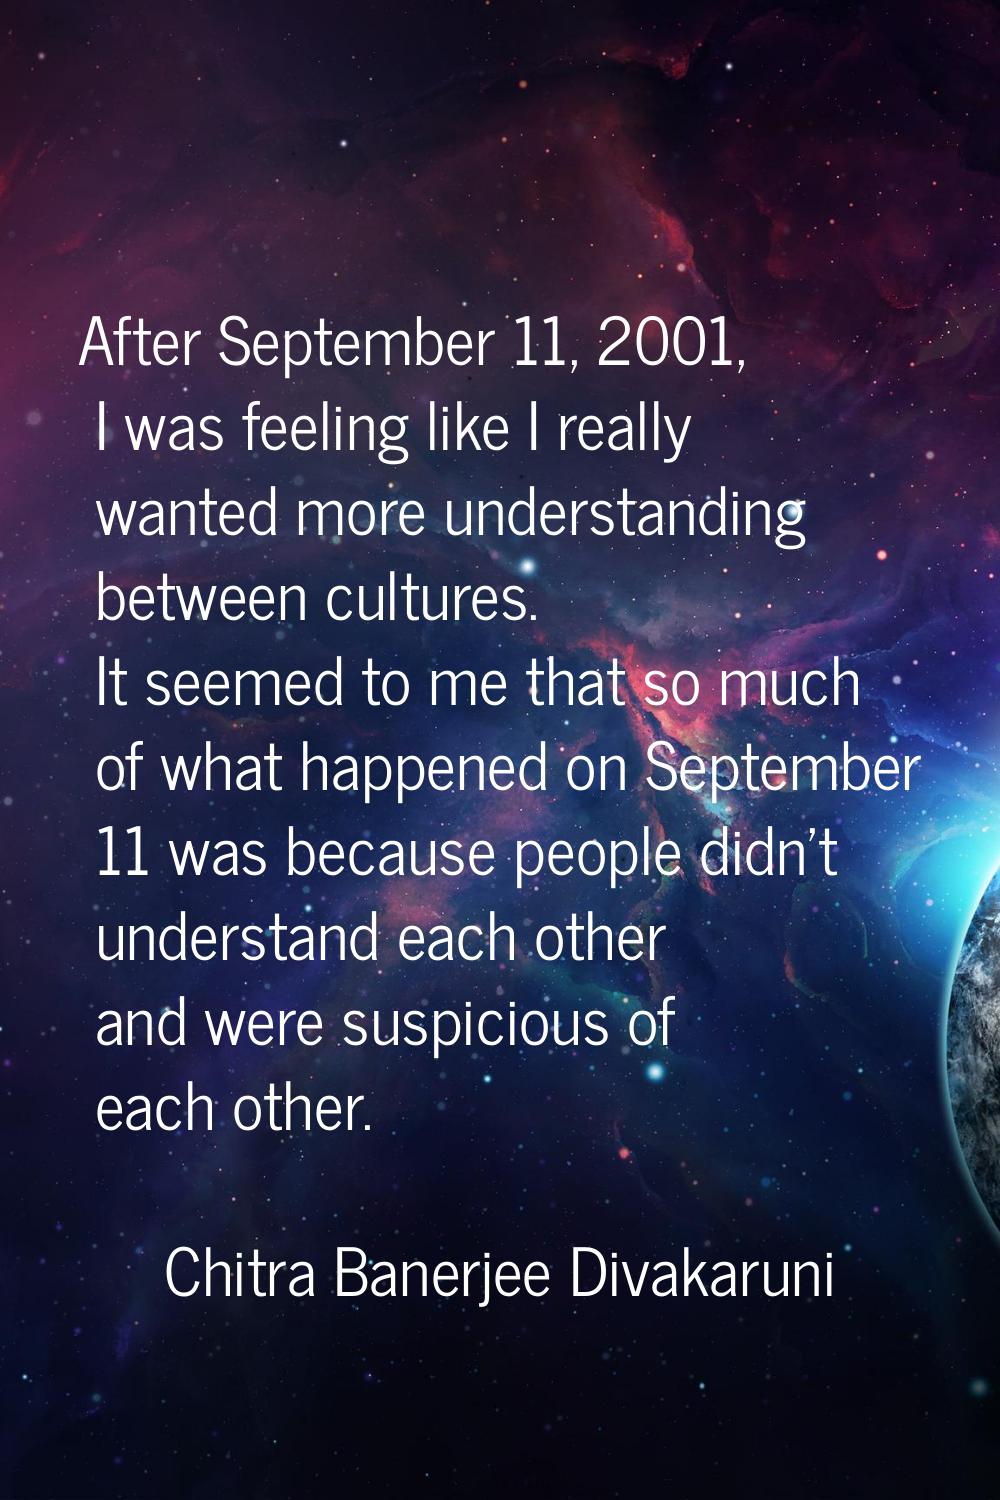 After September 11, 2001, I was feeling like I really wanted more understanding between cultures. I